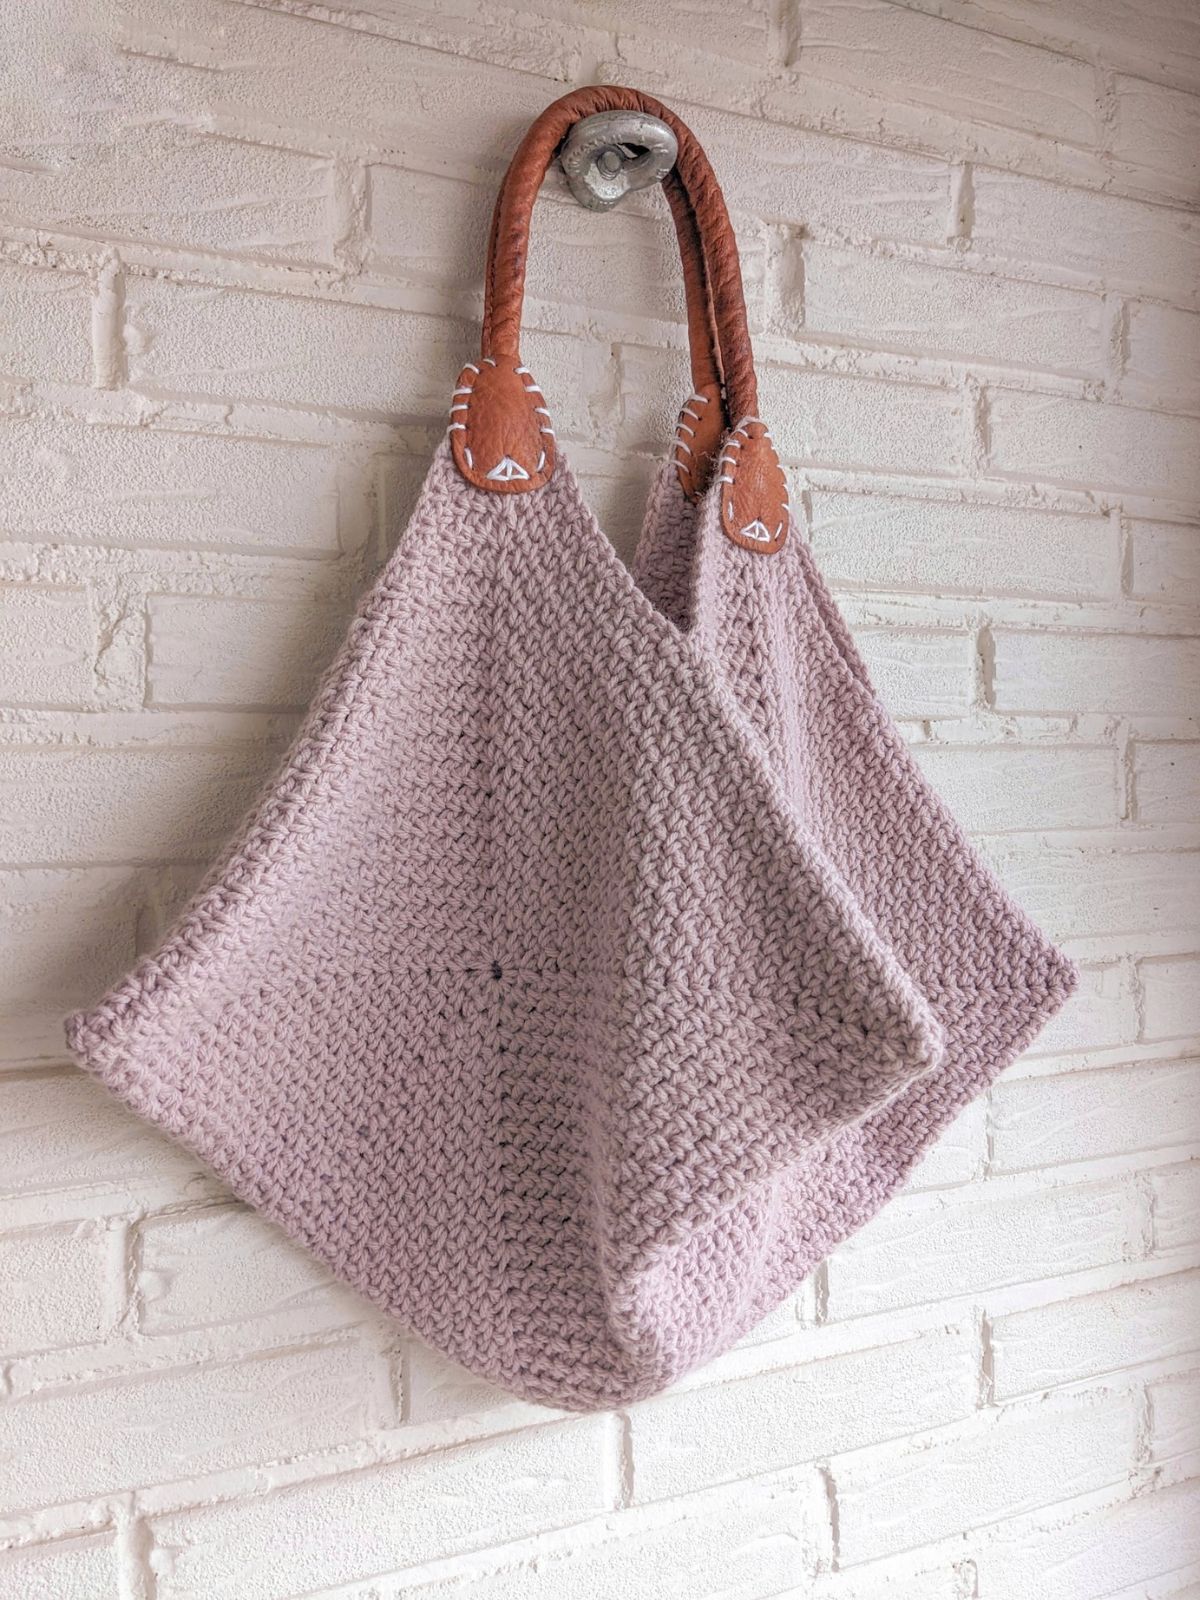 A crochet project bag made with 4 granny squares.